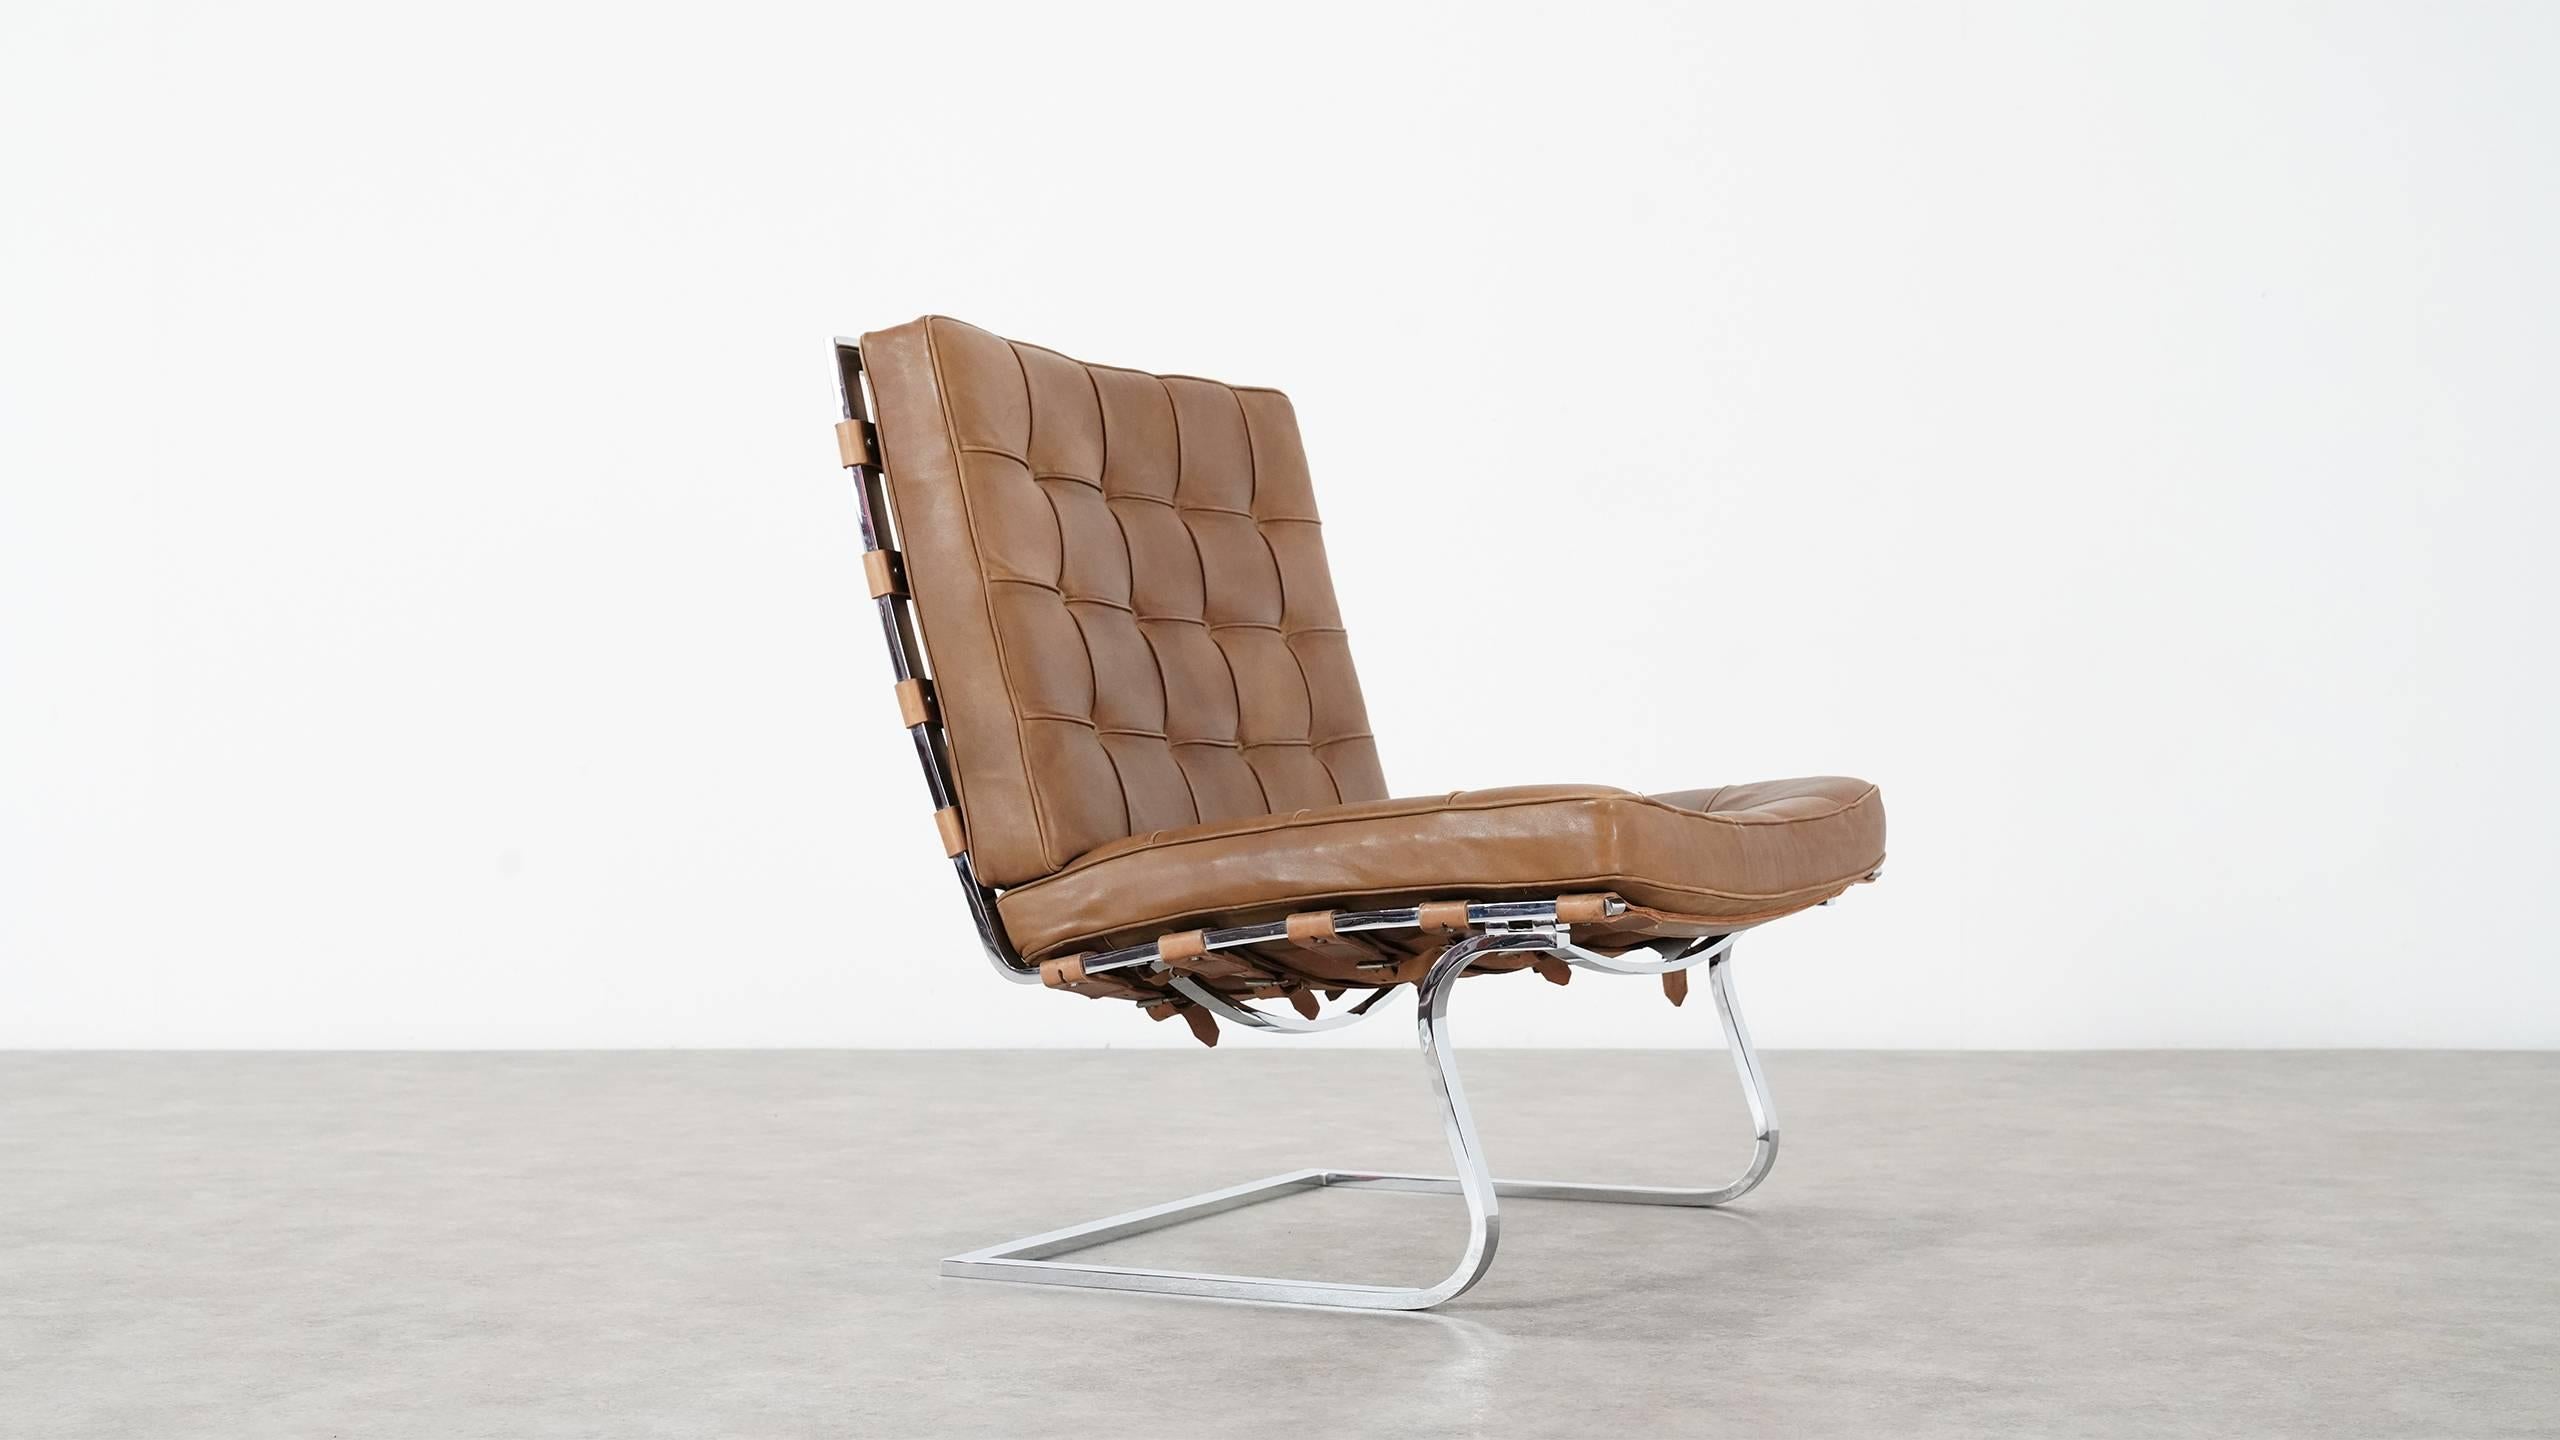 Mid-Century Modern Mies van der Rohe, Tugendhat Lounge Chair MR 70 for Knoll International